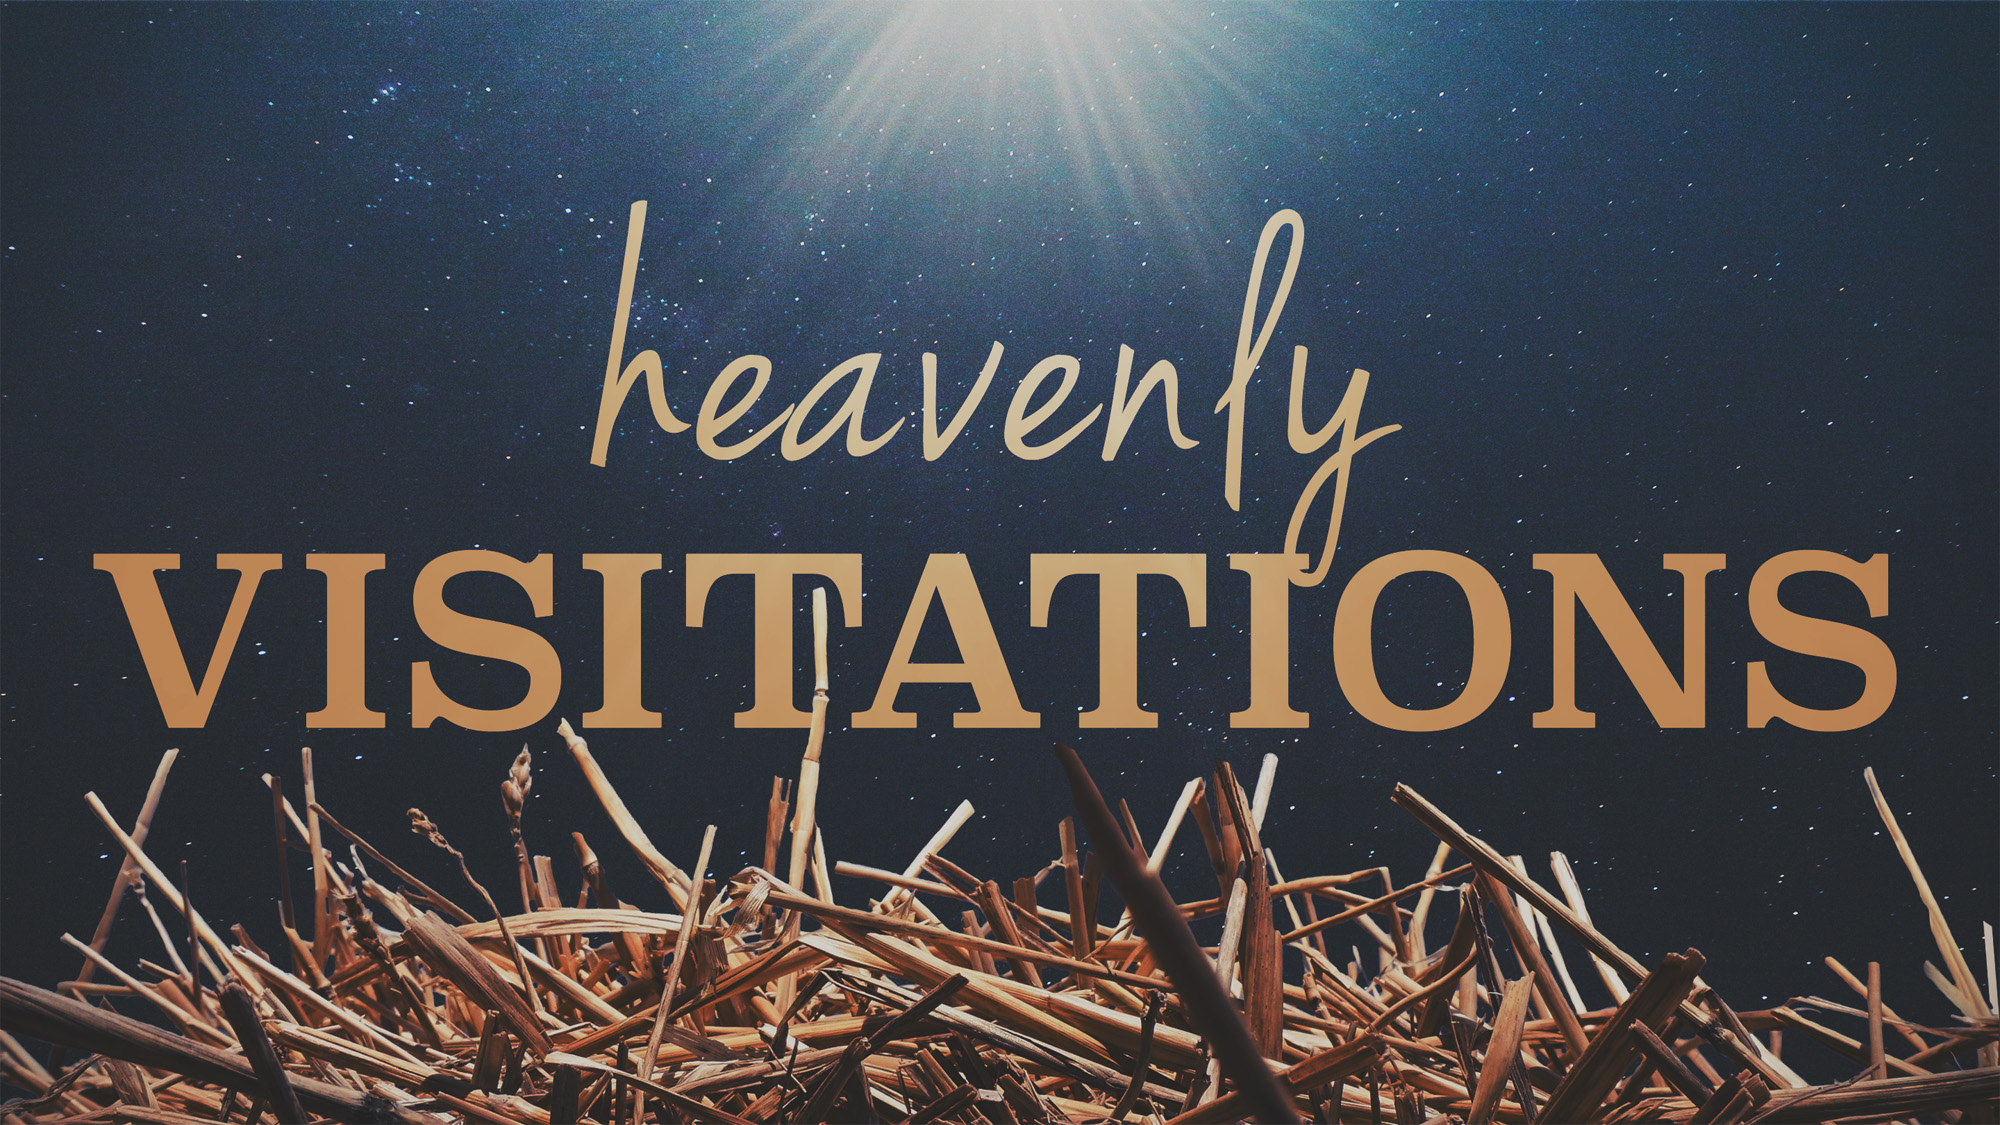 Heavenly Visitations: God Wants to Show Himself Through You